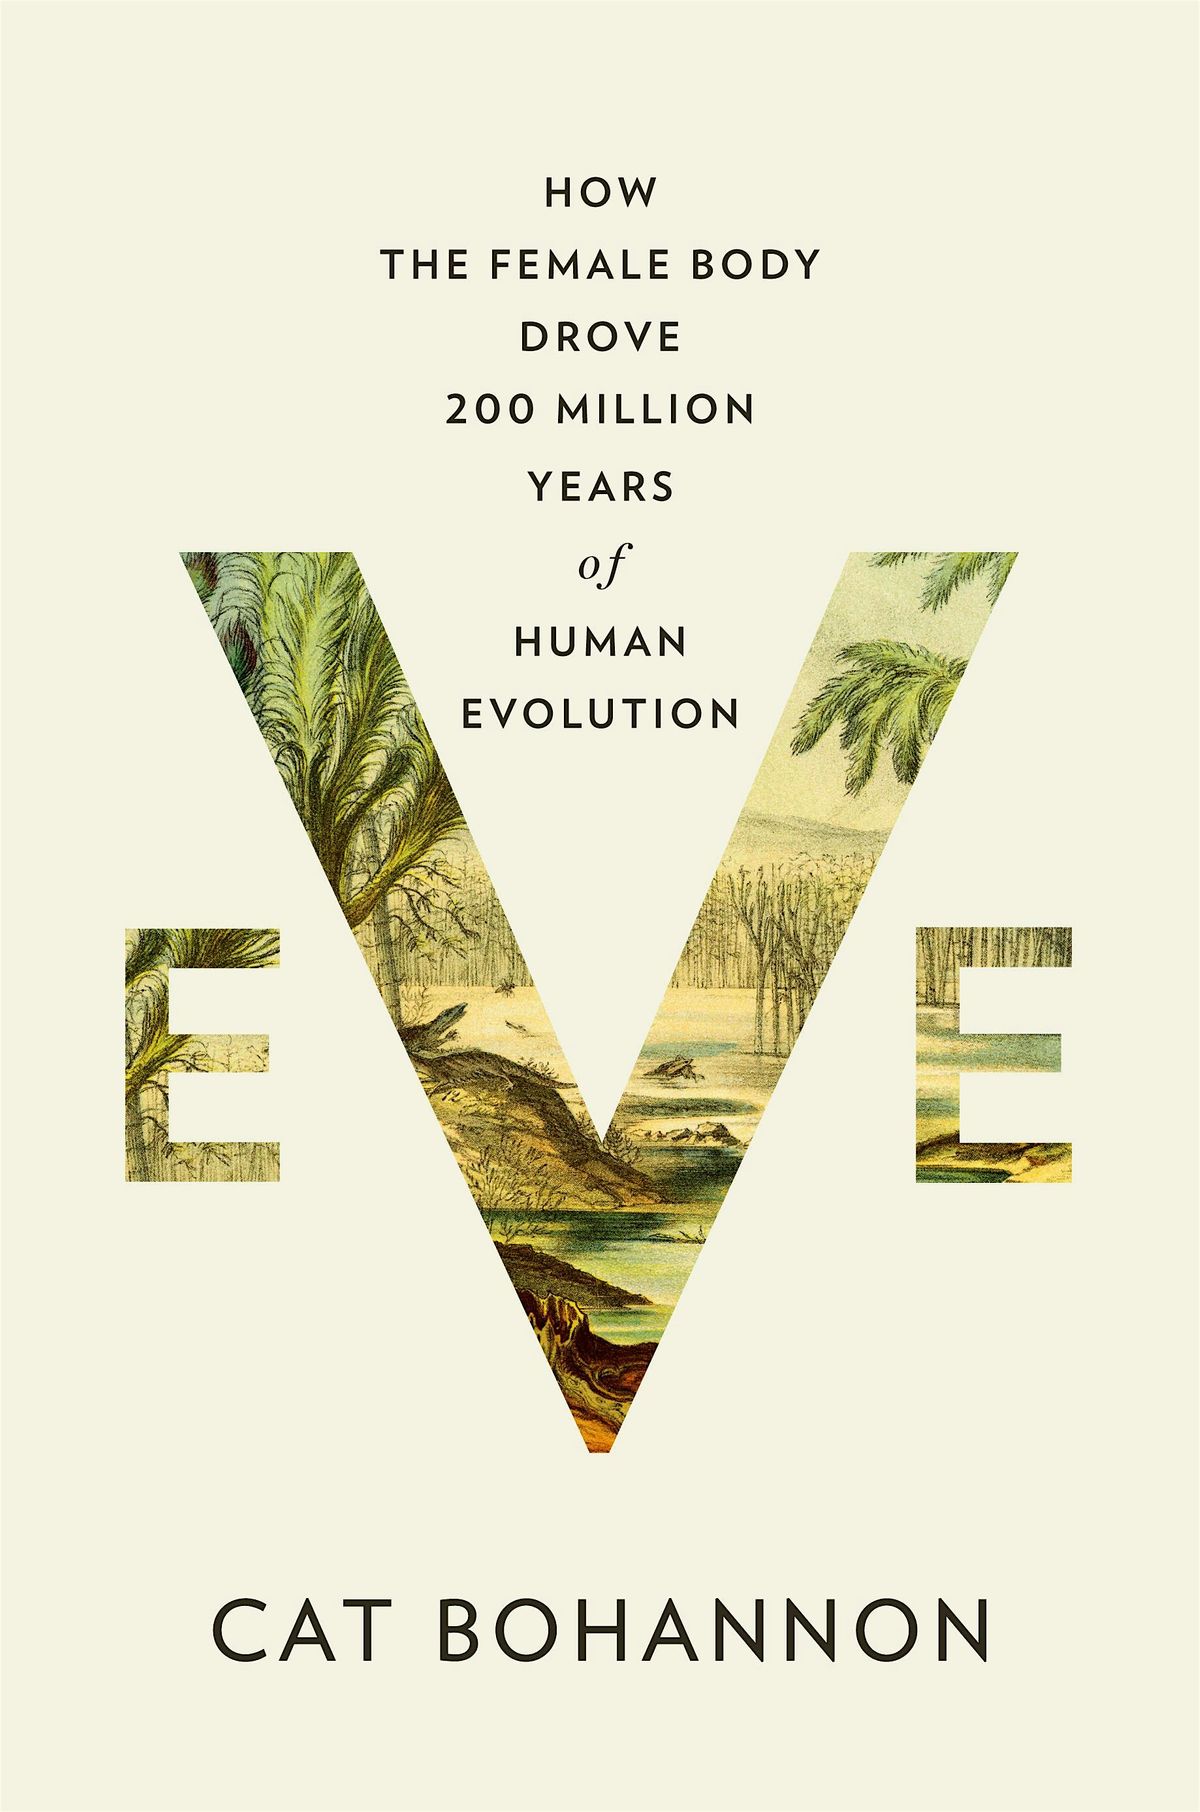 "Eve: How The Female Body Drove 200 Million Years of Human Evolution"